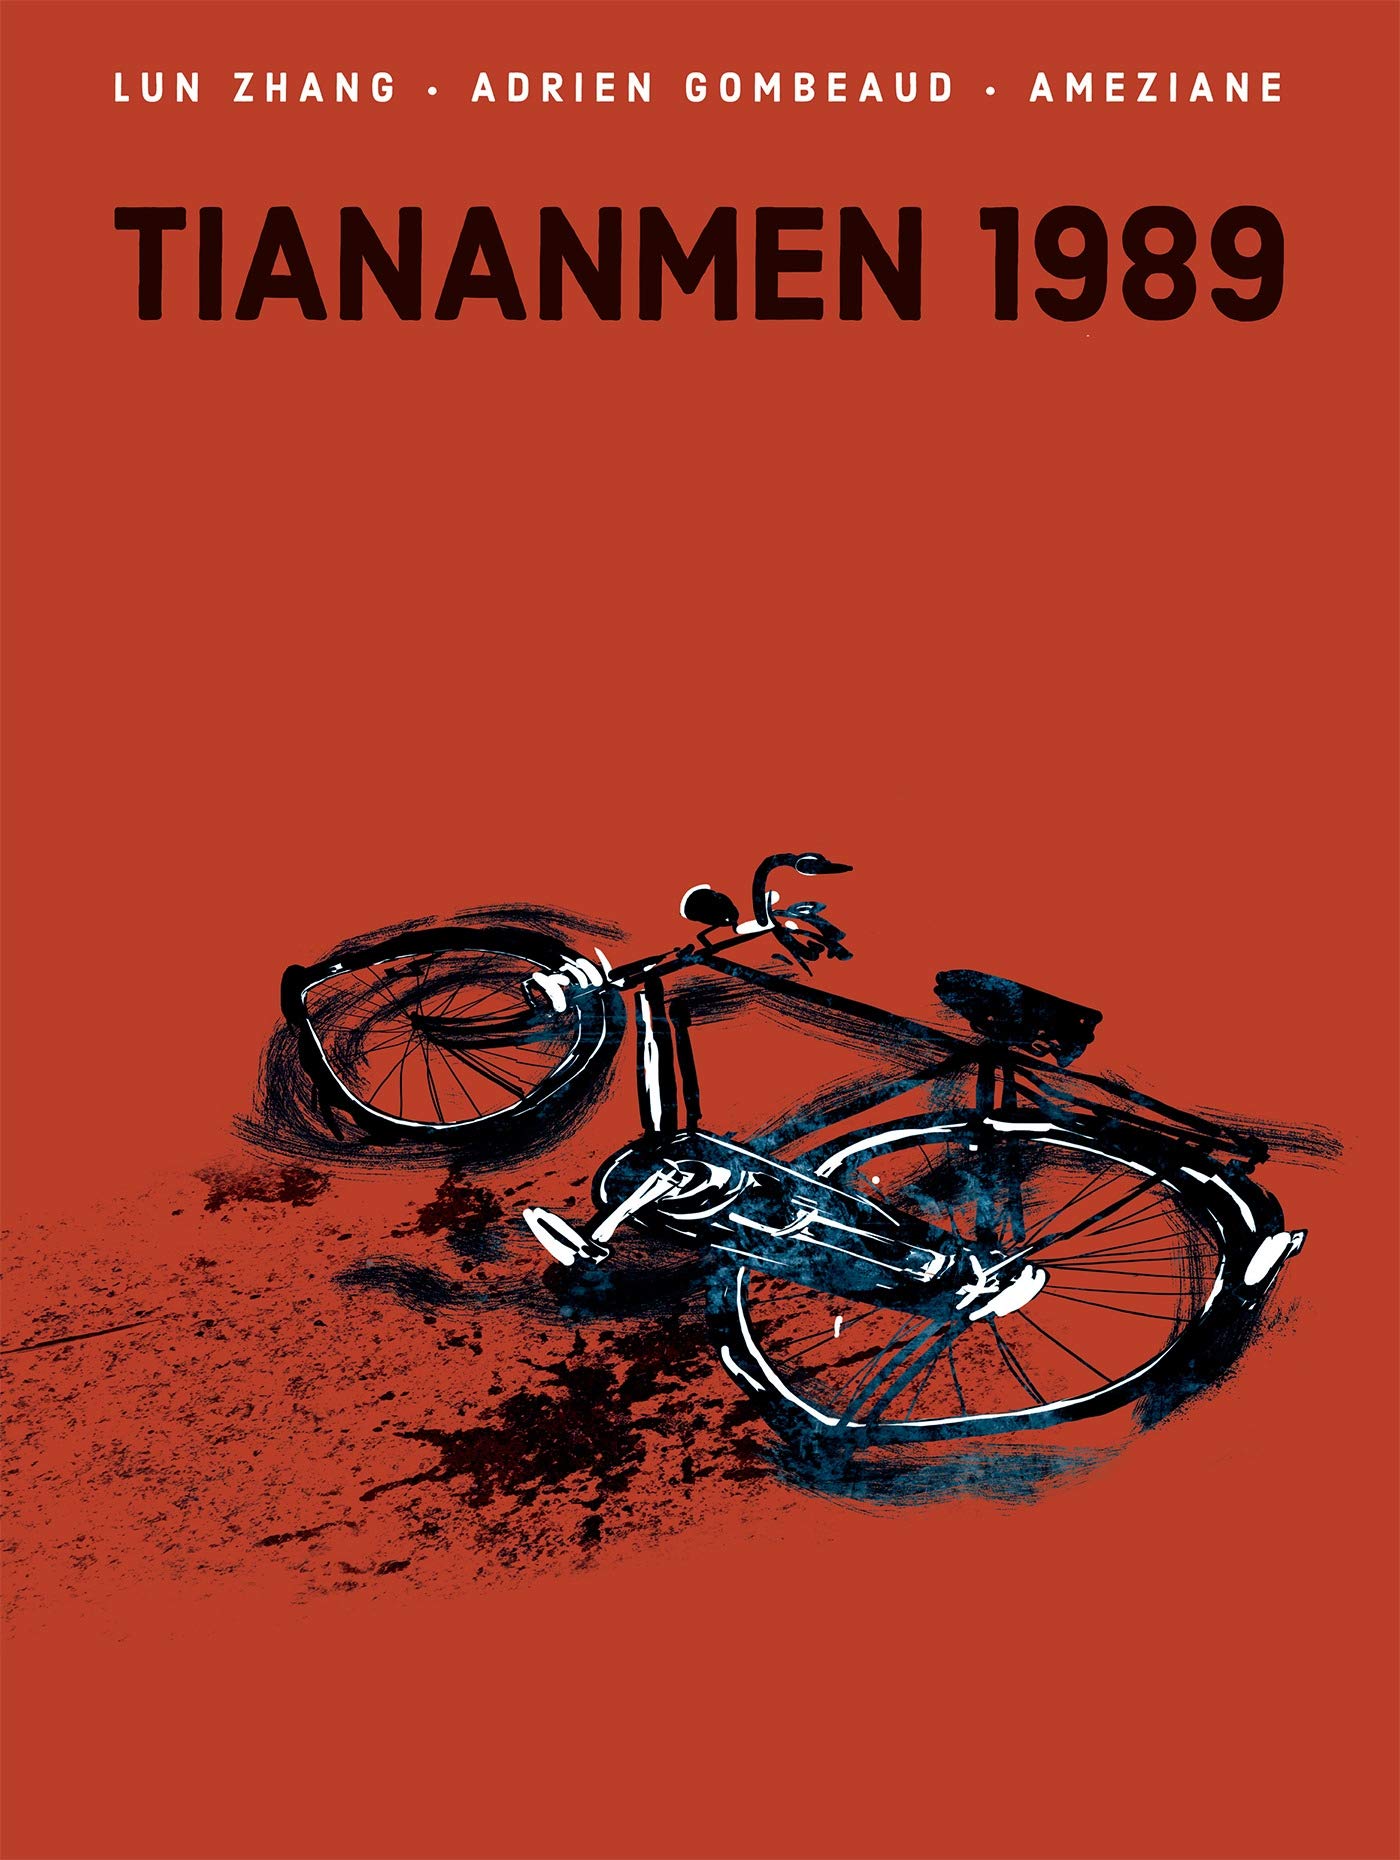 Tiananmen 1989: Our Shattered Hopes